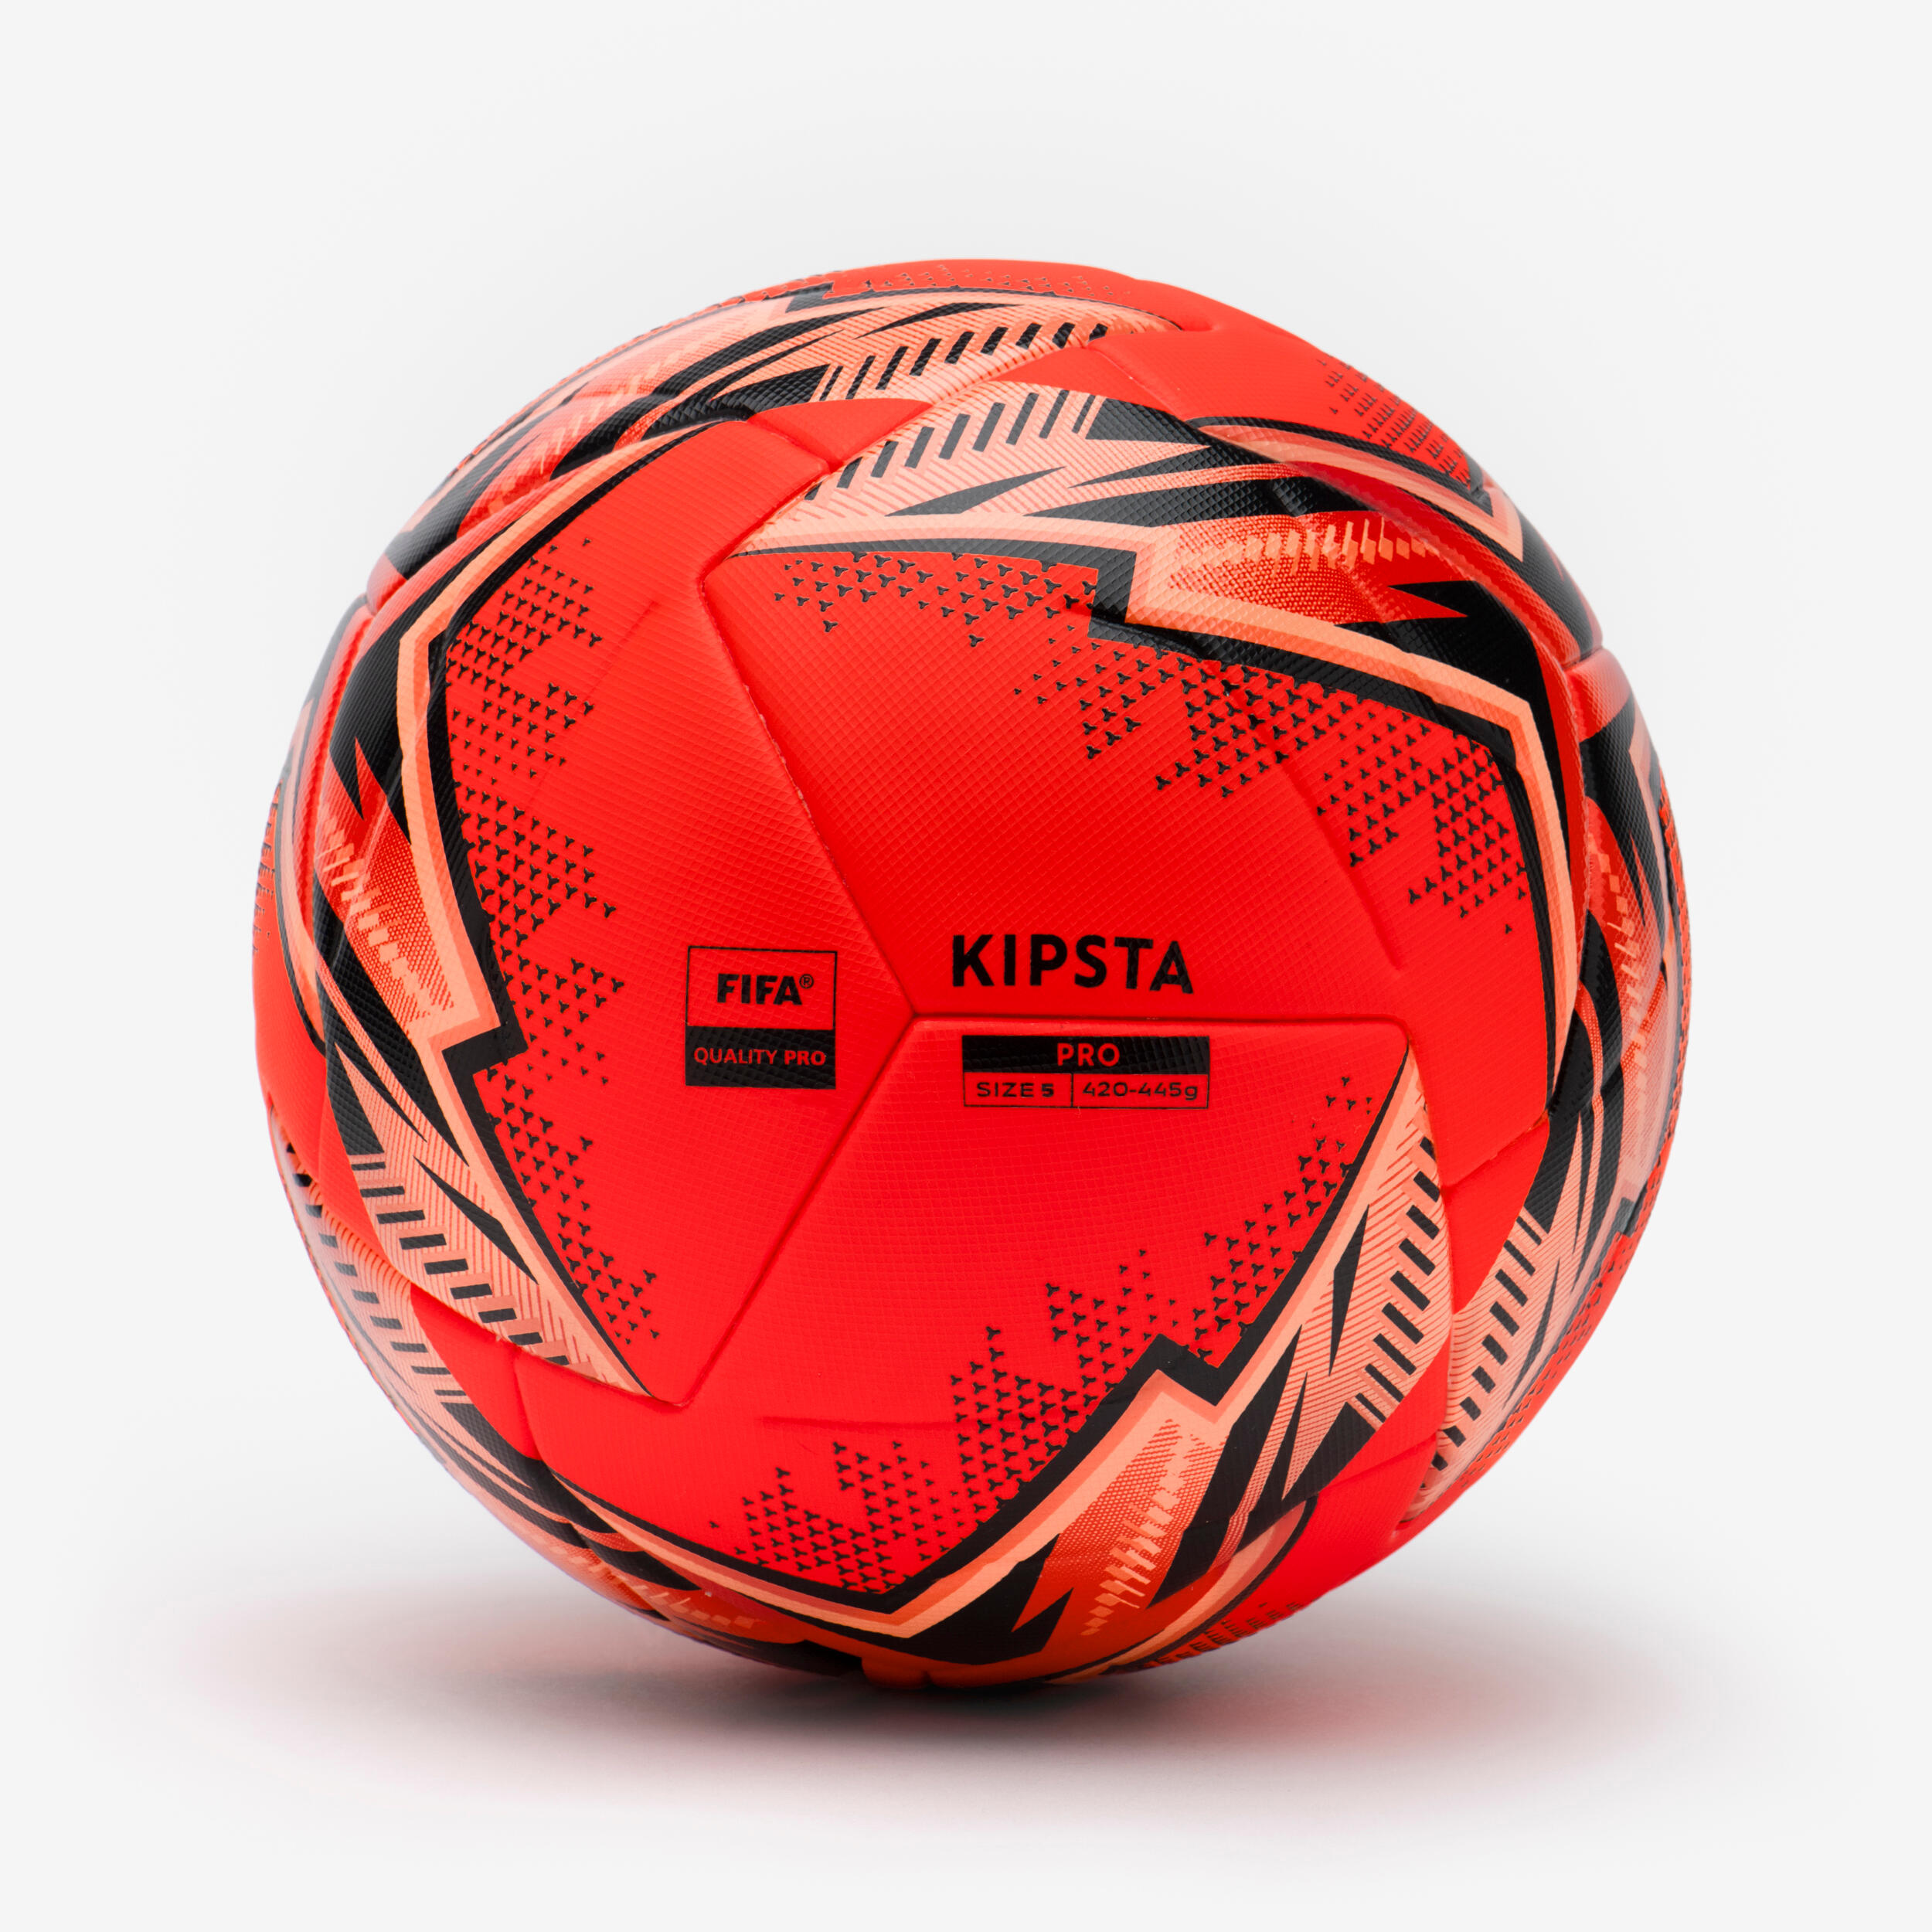 Thermobonded Size 5 FIFA Quality Pro Football Pro Ball - Red 4/8